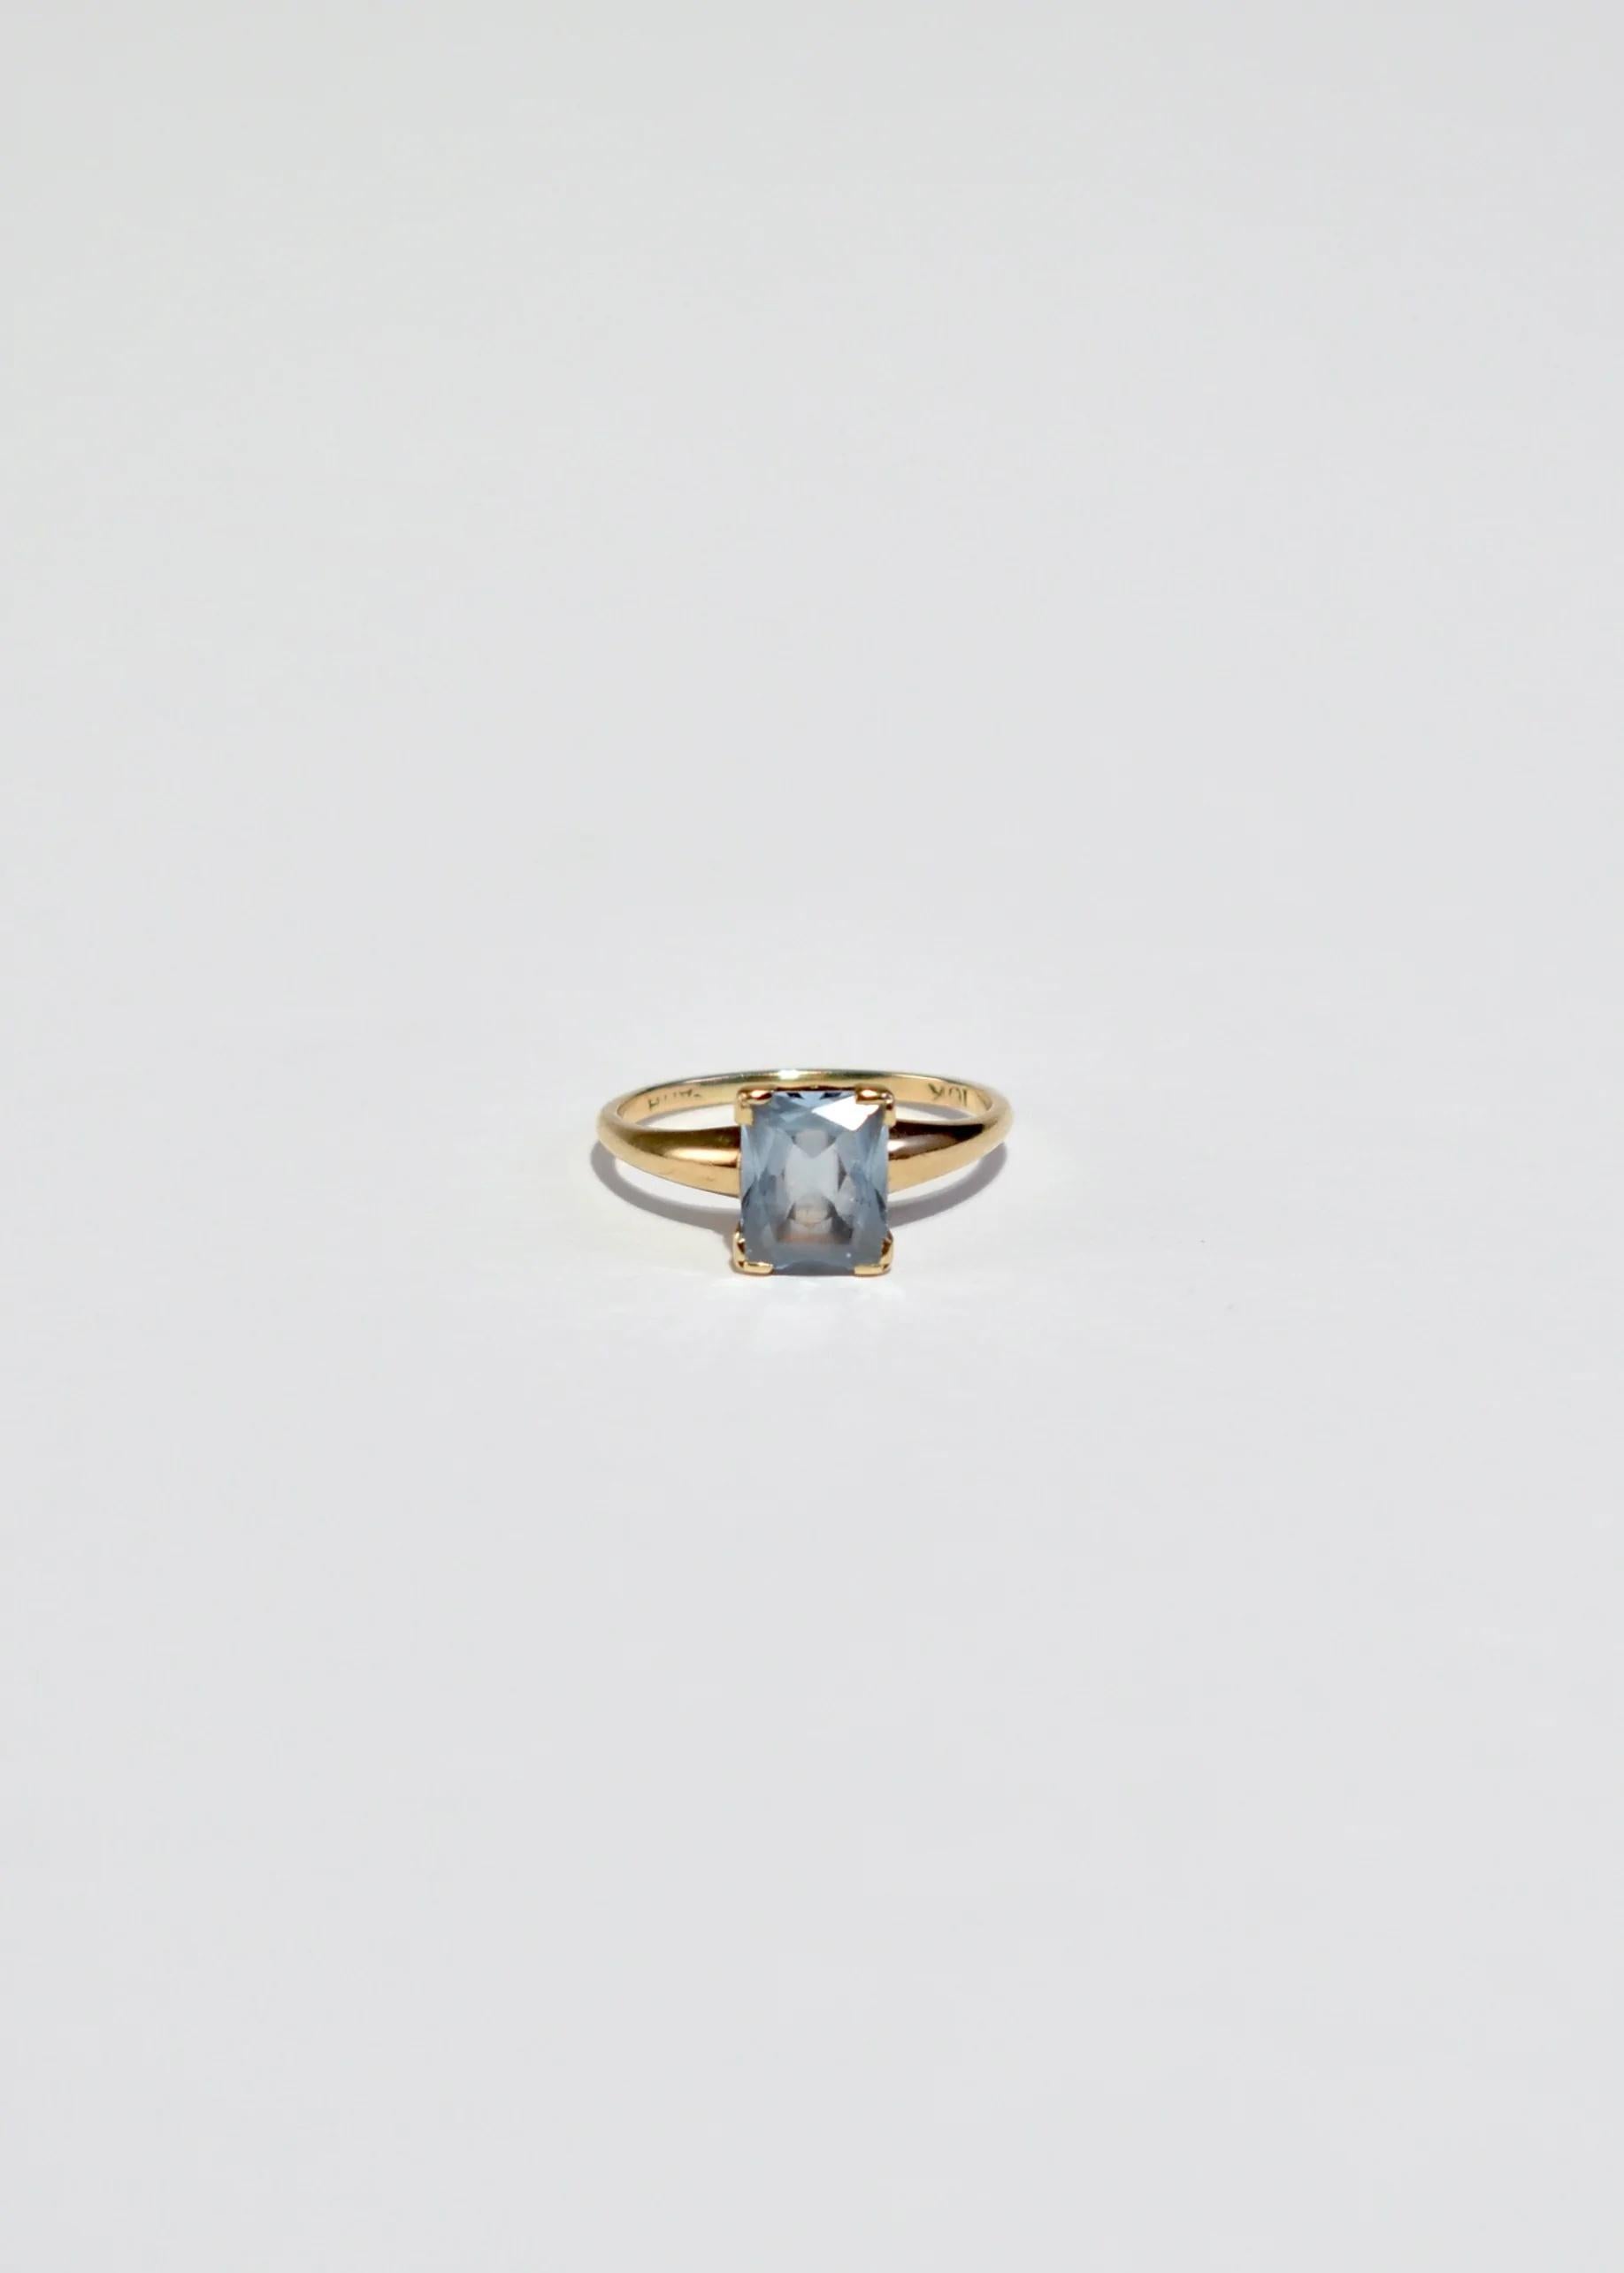 Vintage gold ring with a square faceted blue topaz stone. Stamped 10k.

Material: 10k gold, blue topaz.

